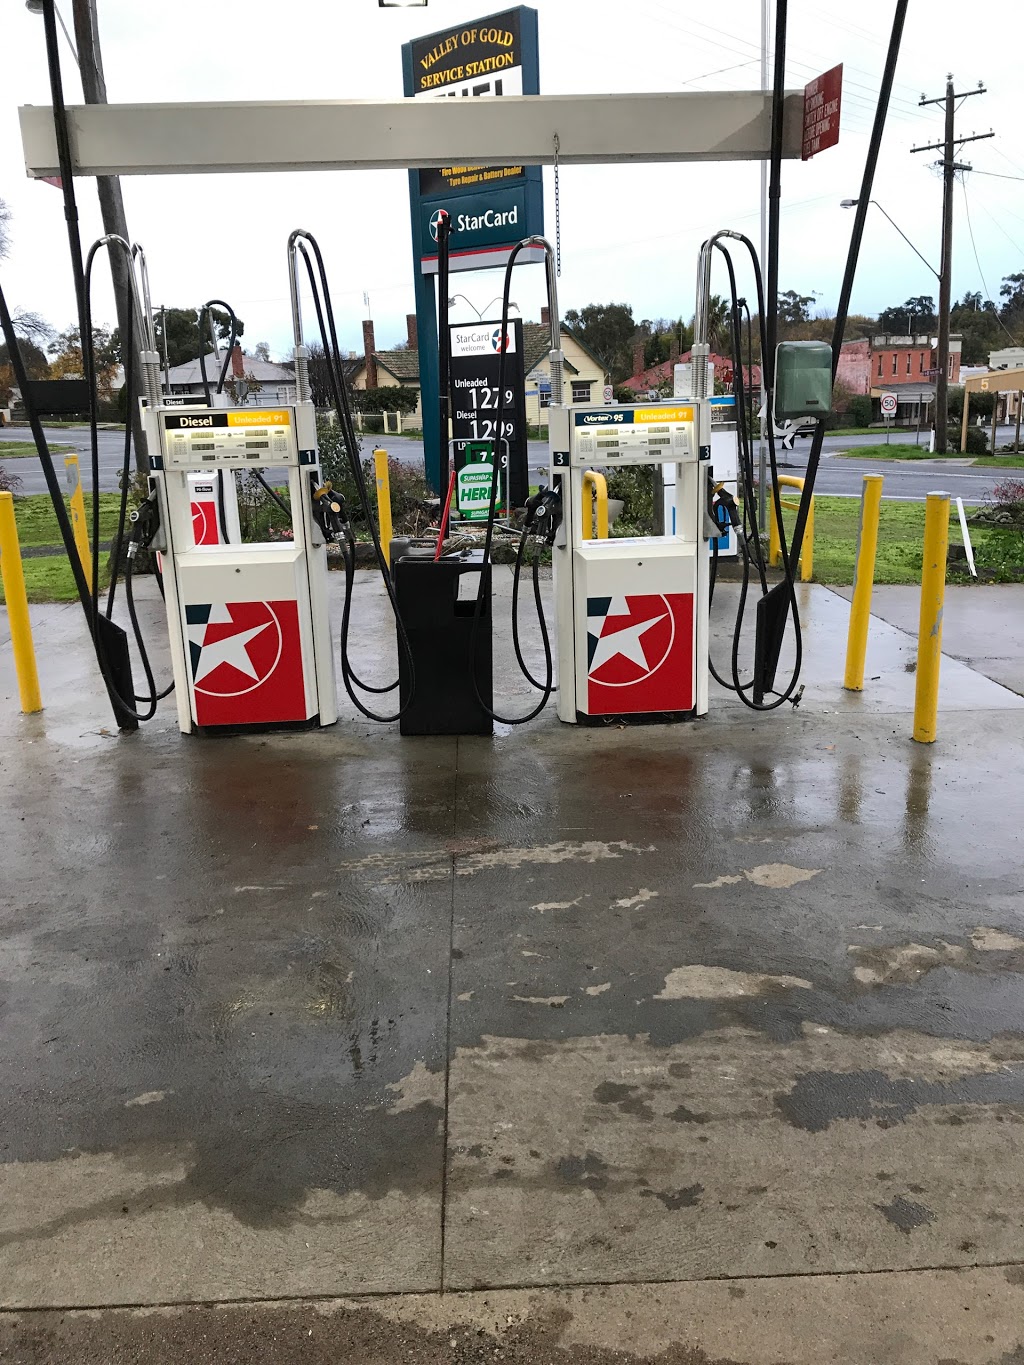 Valley of Gold Service Station | gas station | 7 Service St, Clunes VIC 3370, Australia | 0353453139 OR +61 3 5345 3139